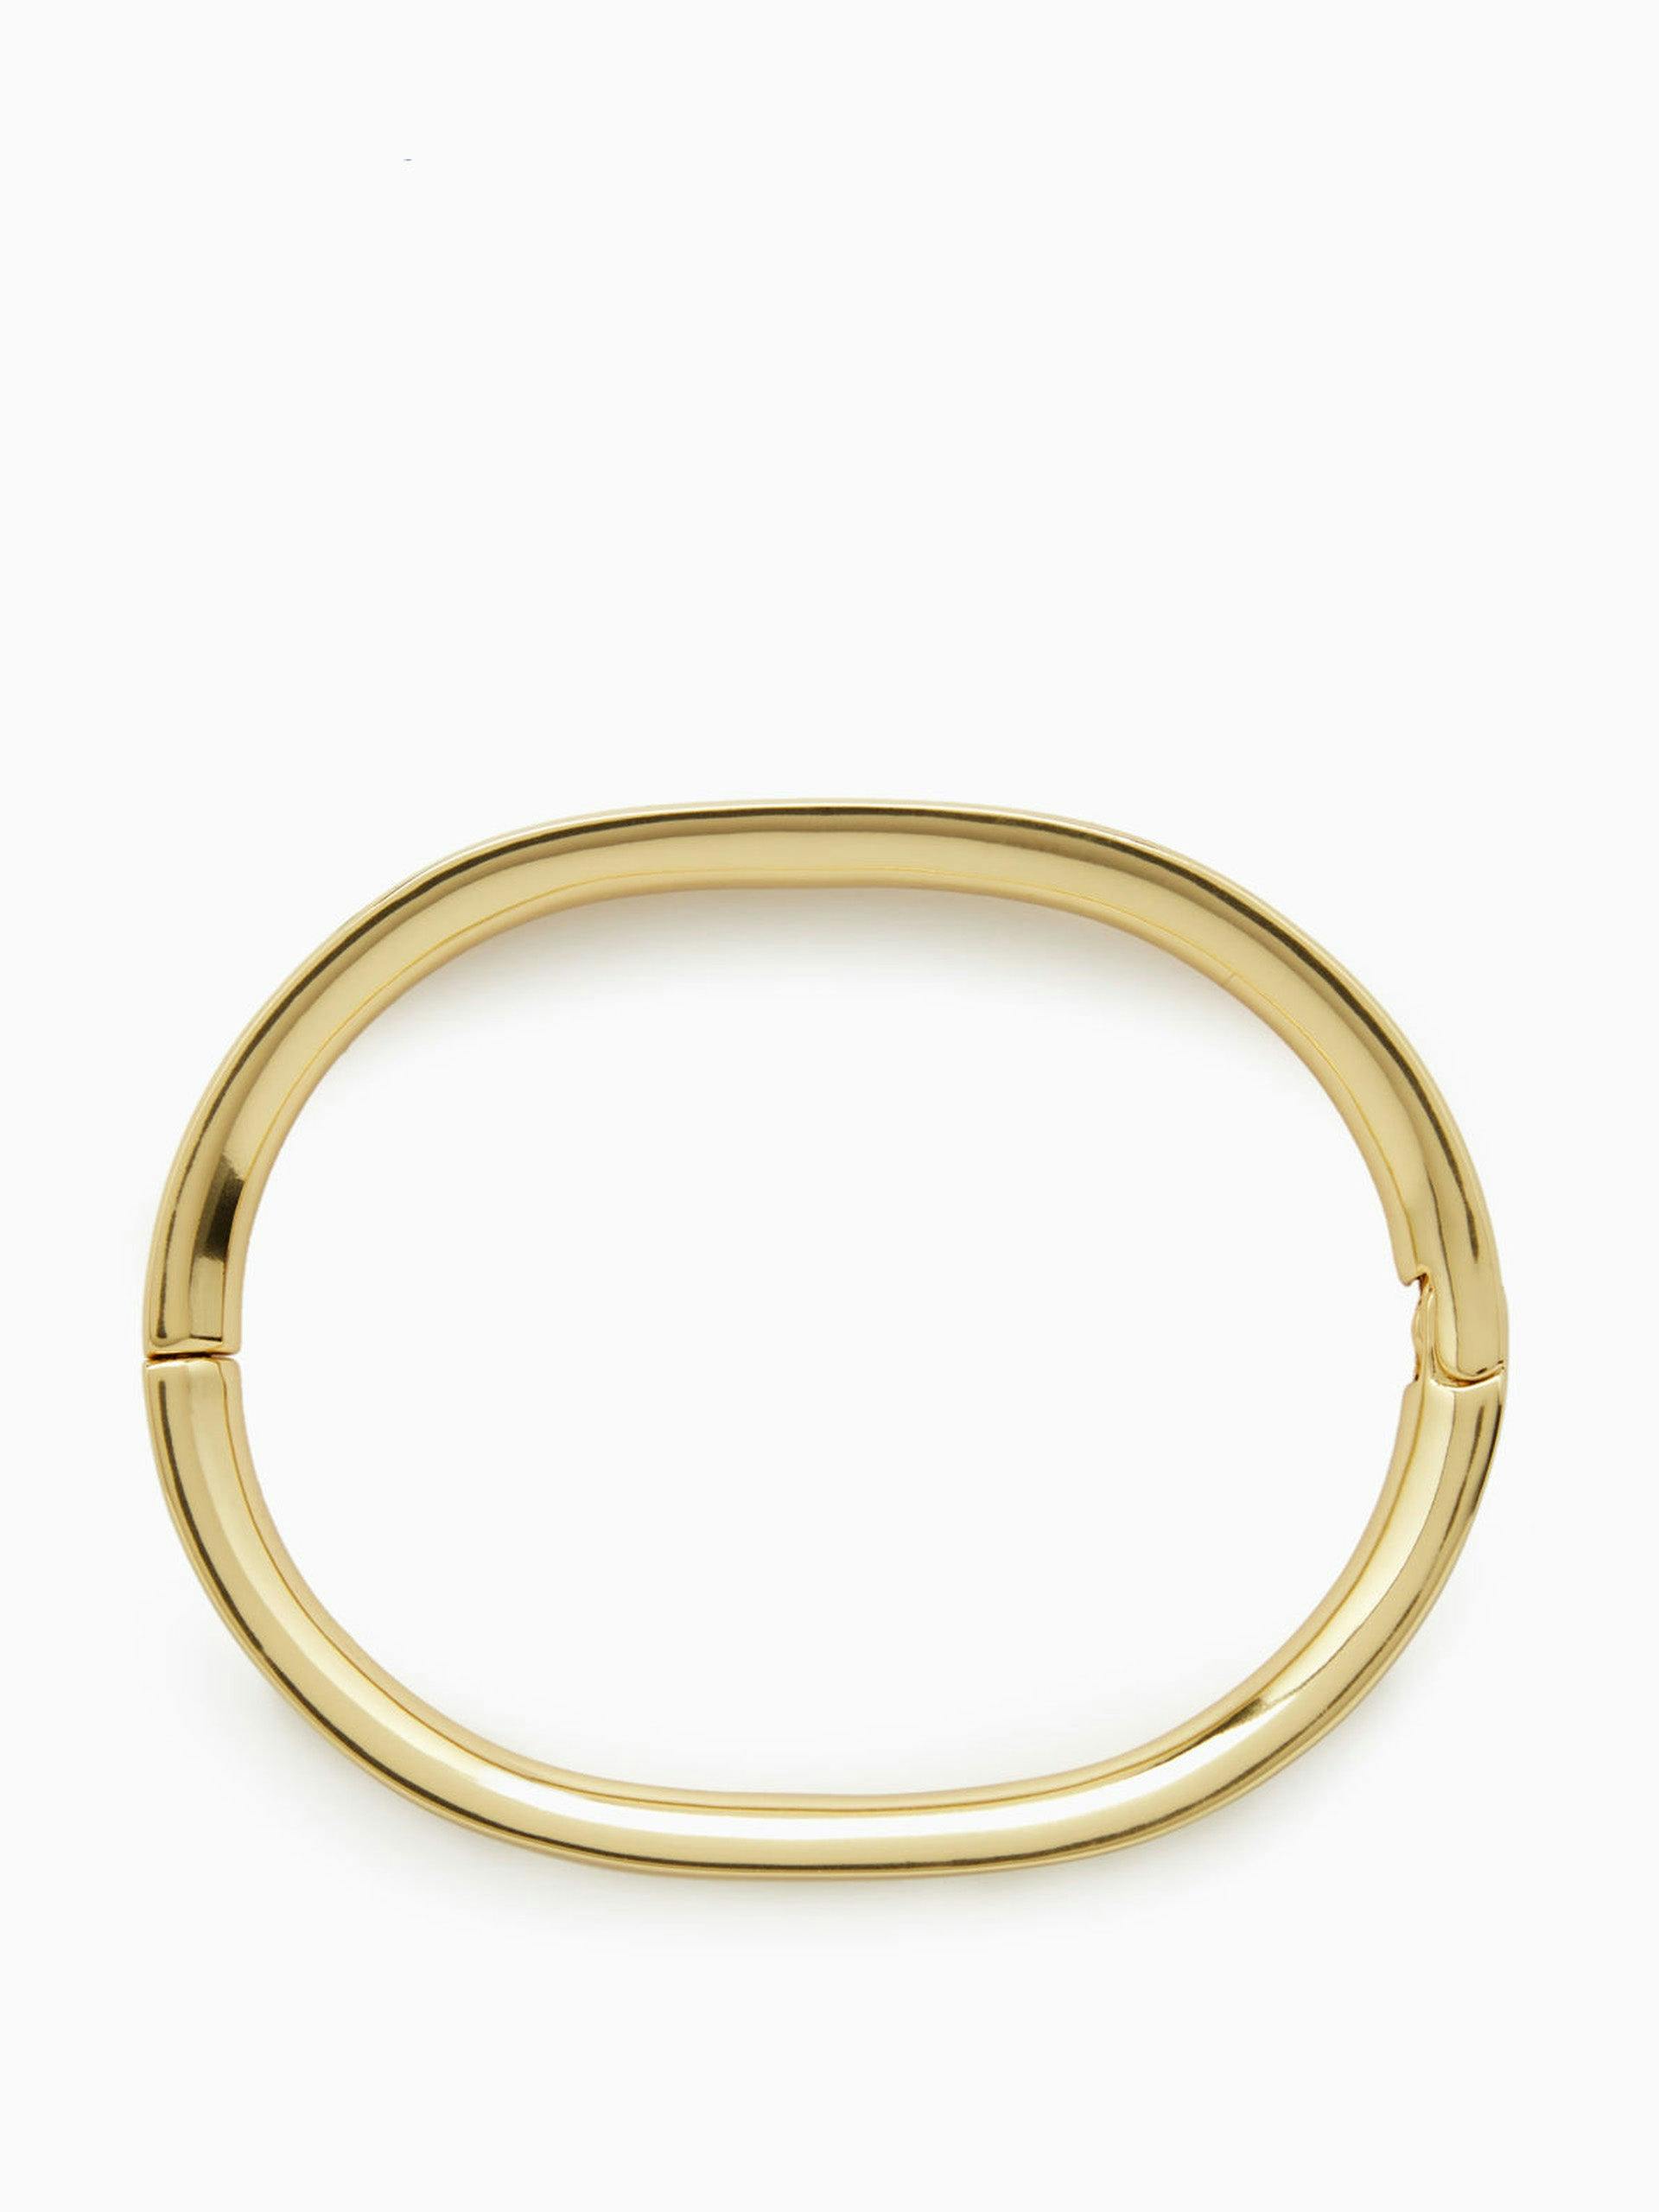 Recycled brass hinged bangle